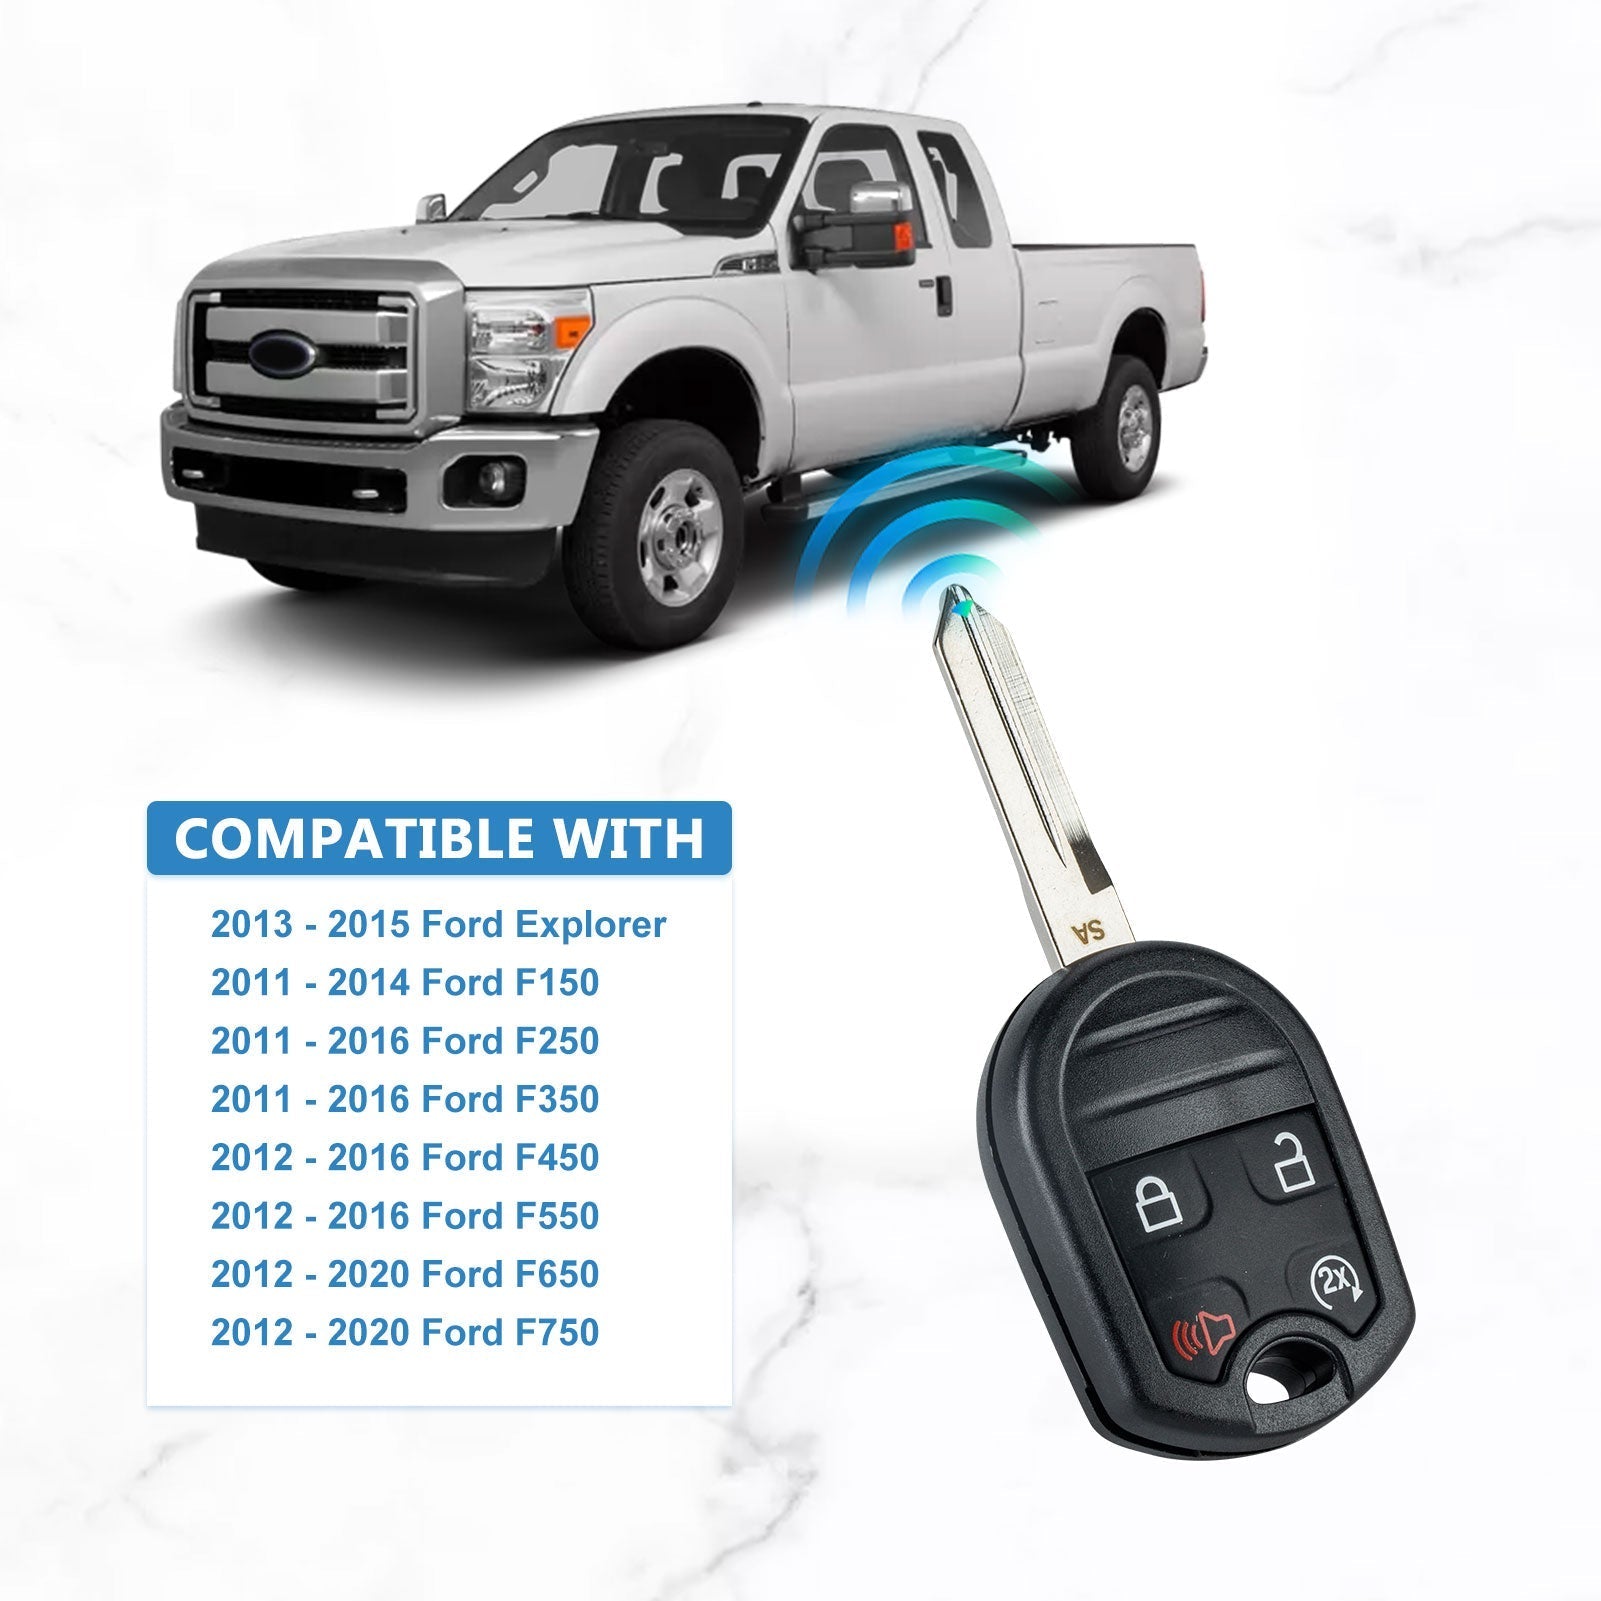 315MHZ Replacement Keyless Remote Head Key for 2012-2016 Ford F550 2012-2017 Ford F650 2012-2017 Ford F750 80 bit chip OUCD6000022 164-R8067  KR-F4SF-10